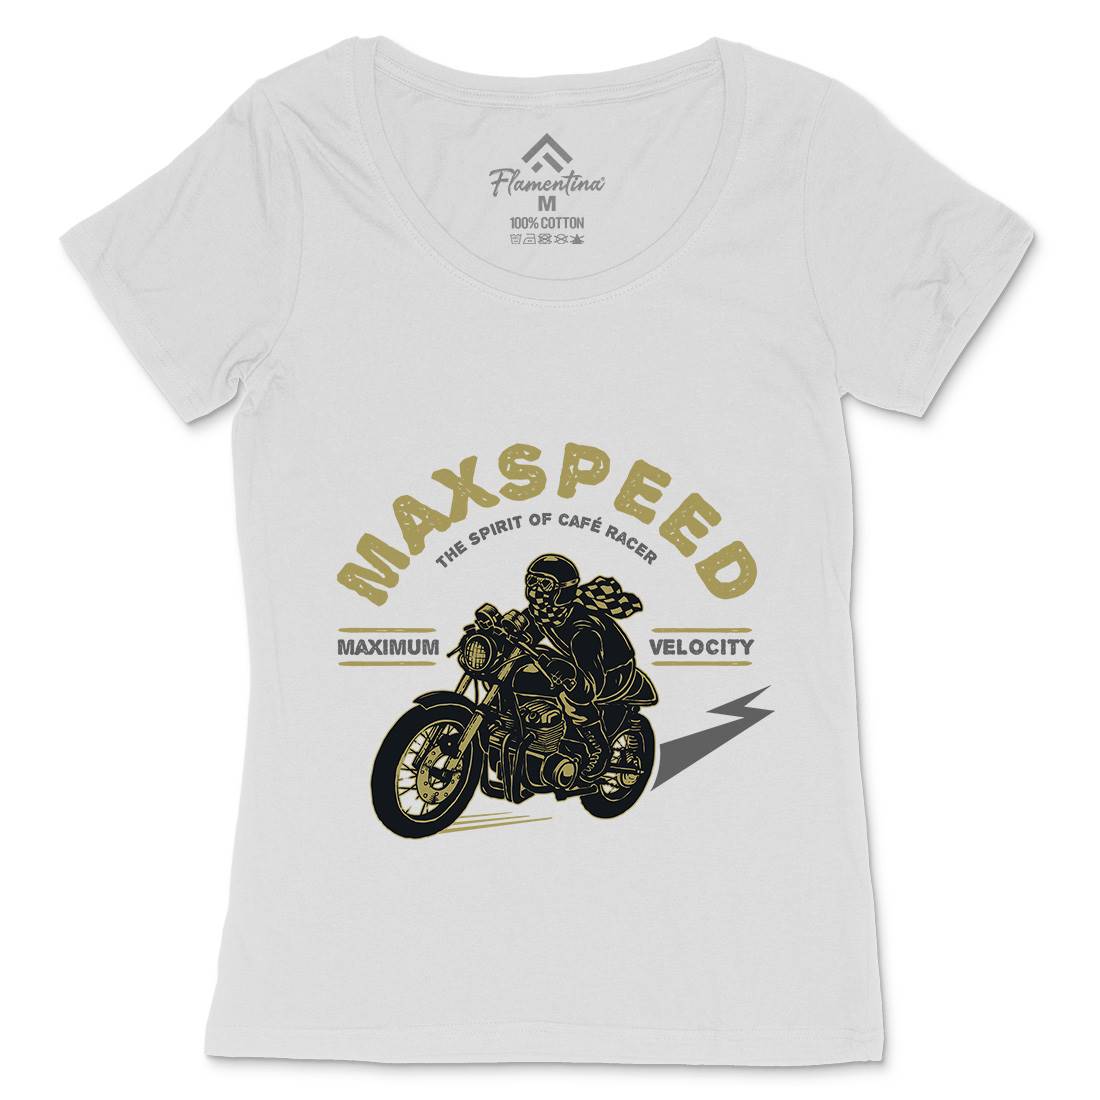 Max Speed Womens Scoop Neck T-Shirt Motorcycles A343